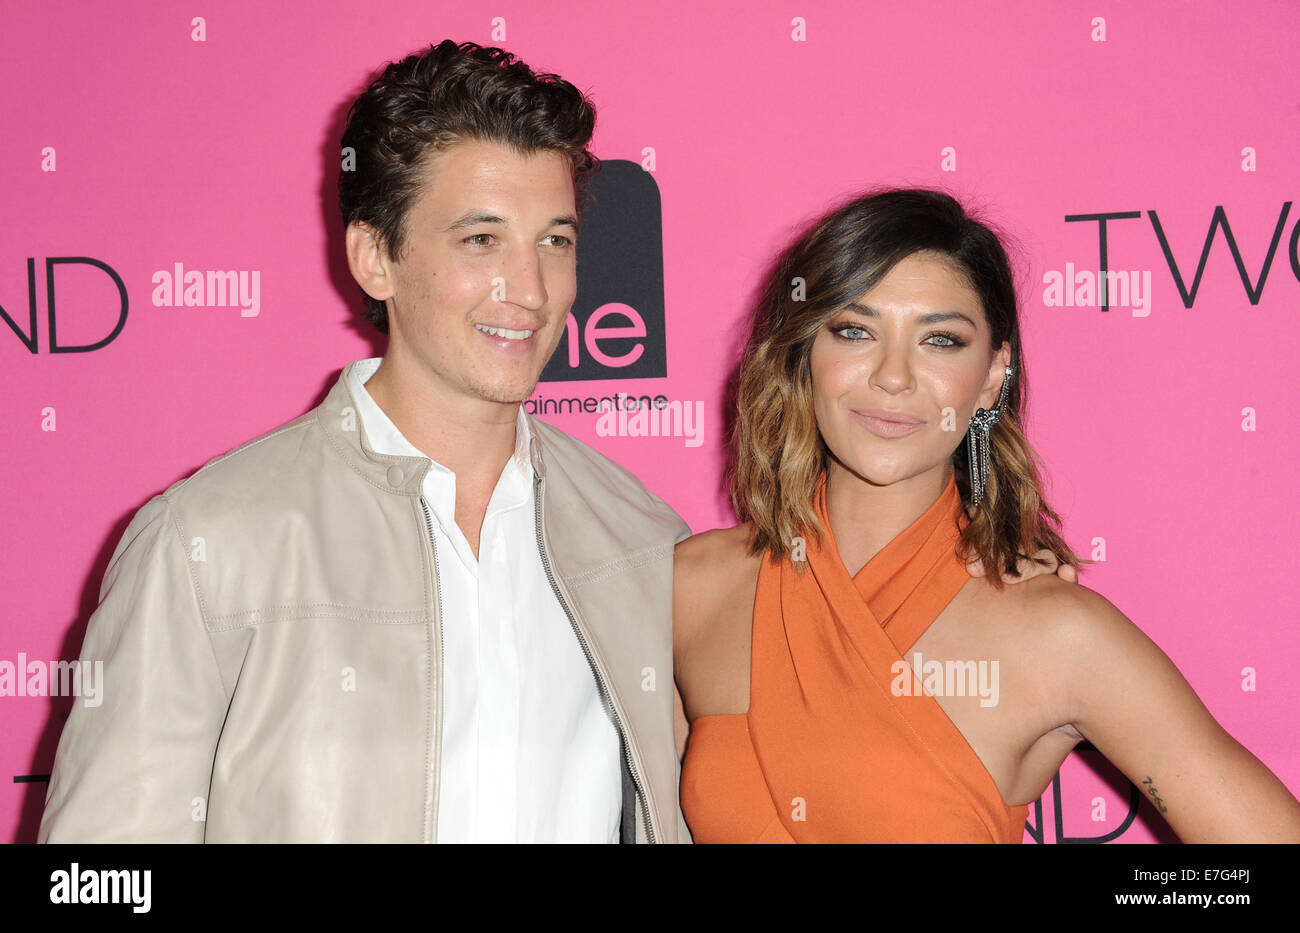 Miles Teller, Analeigh Tipton Have TWO NIGHT STAND - Official US